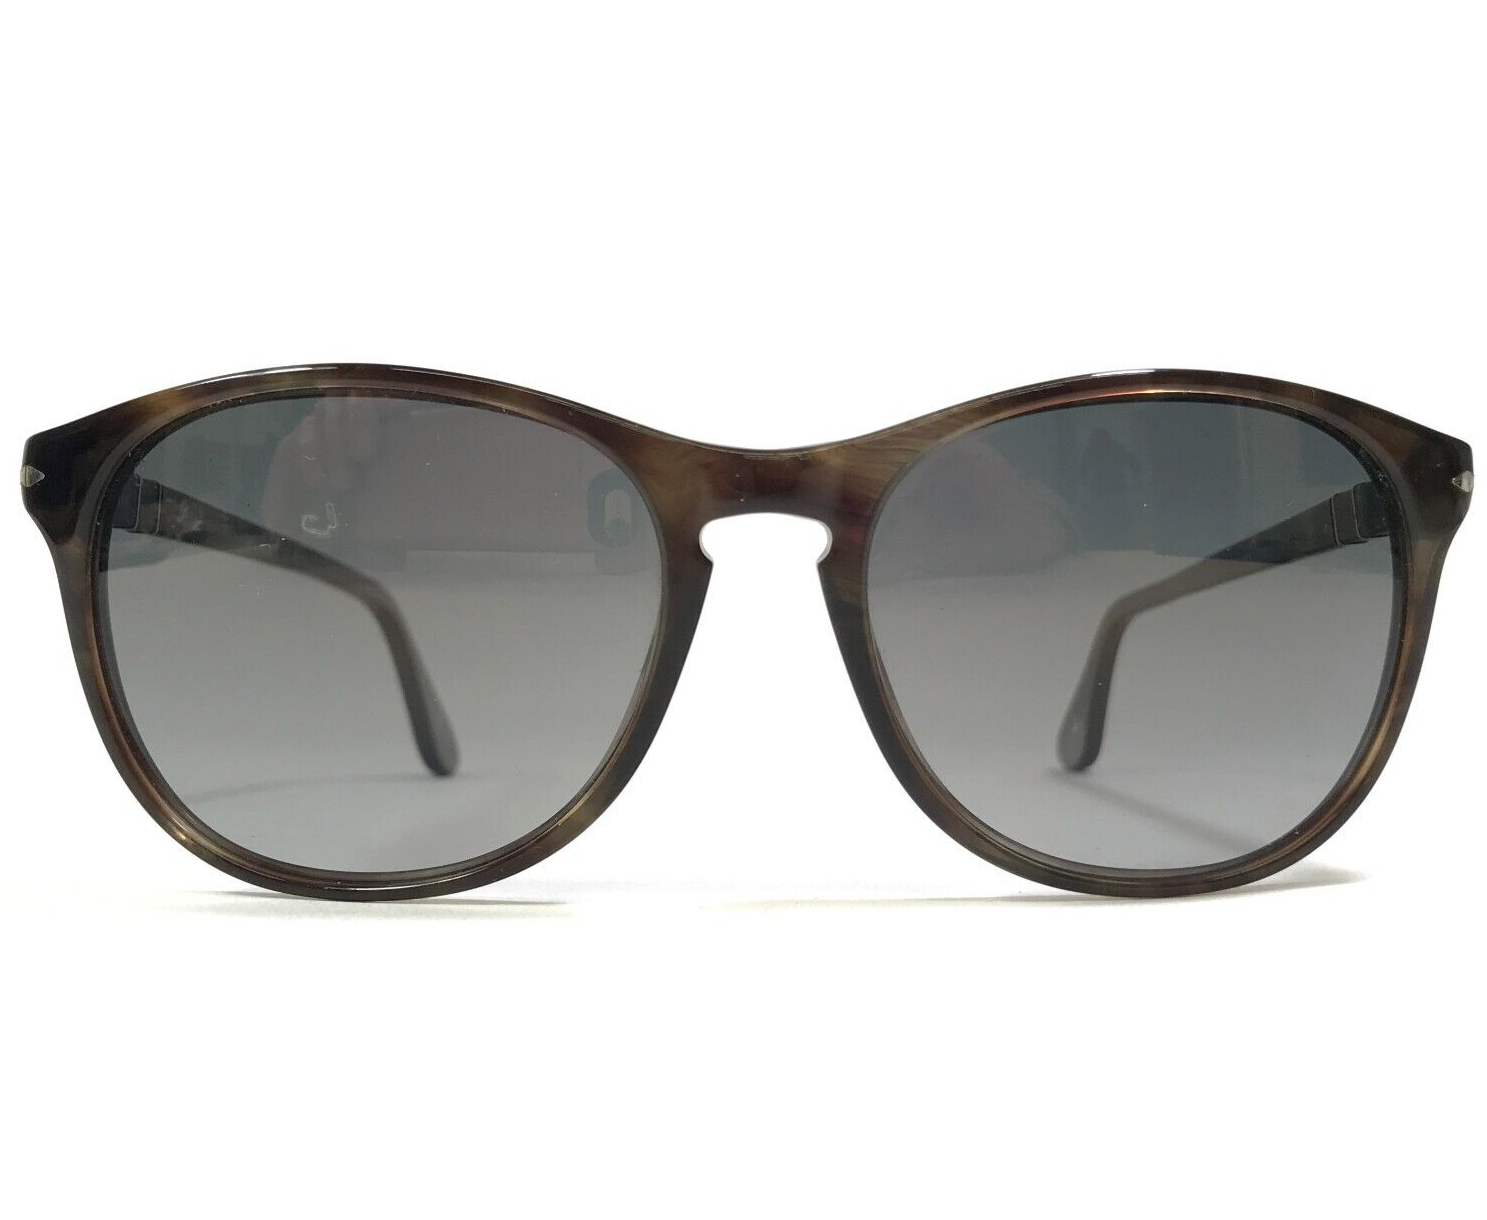 Primary image for Persol Sunglasses 3042-S 972/M3 Tortoise Square Frames with Gray Lenses